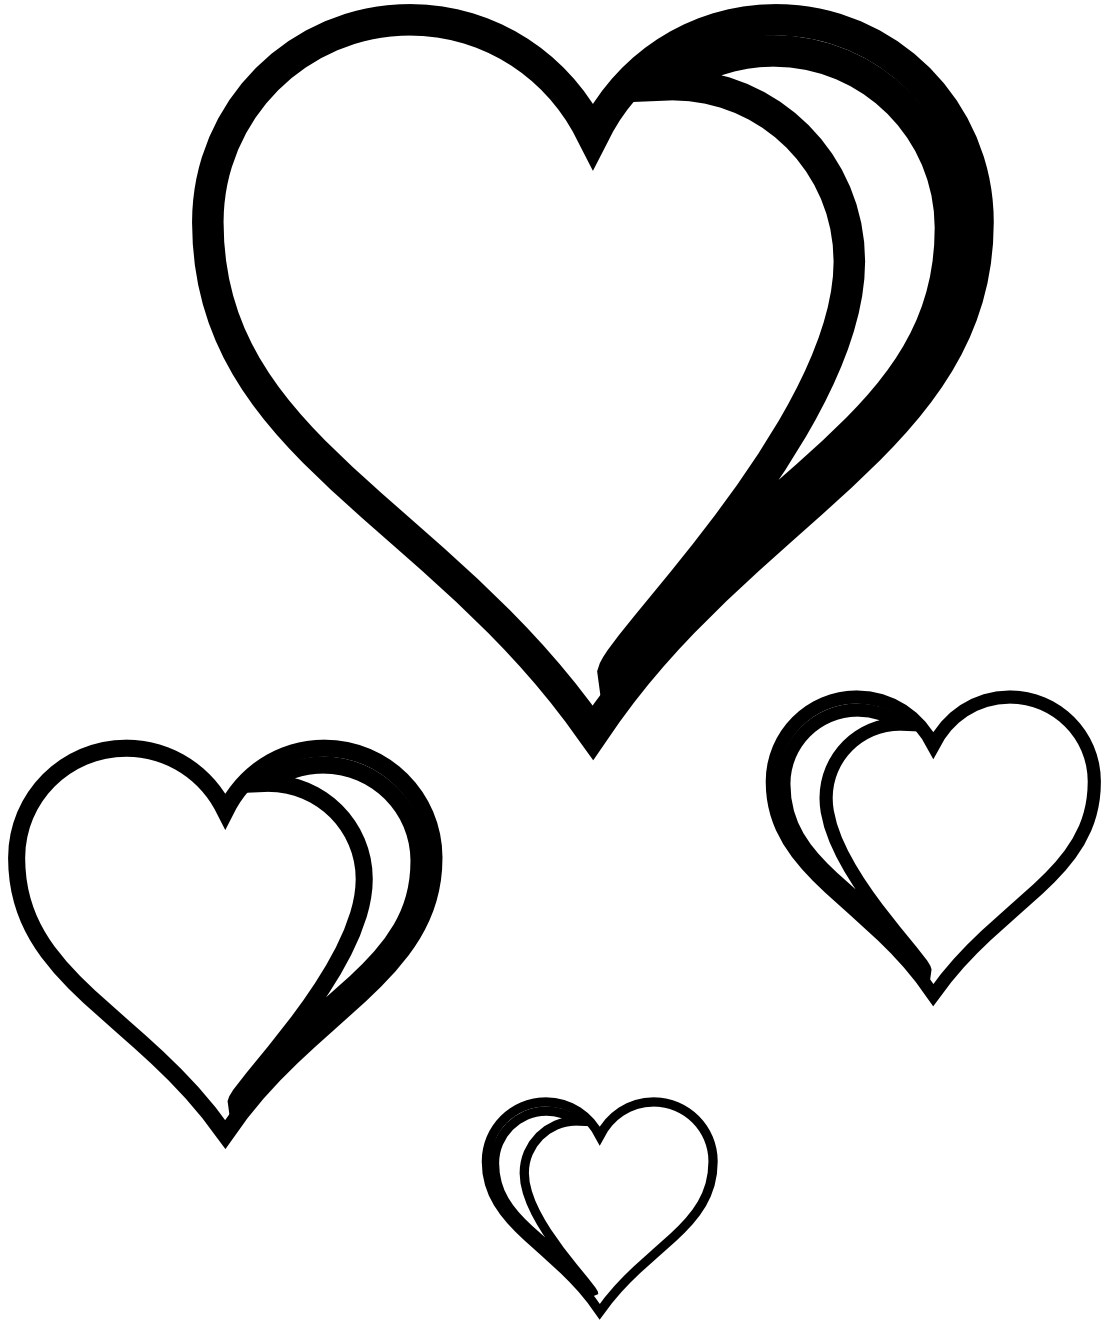 Two Hearts Clipart Black And White | Clipart Panda - Free Clipart ...